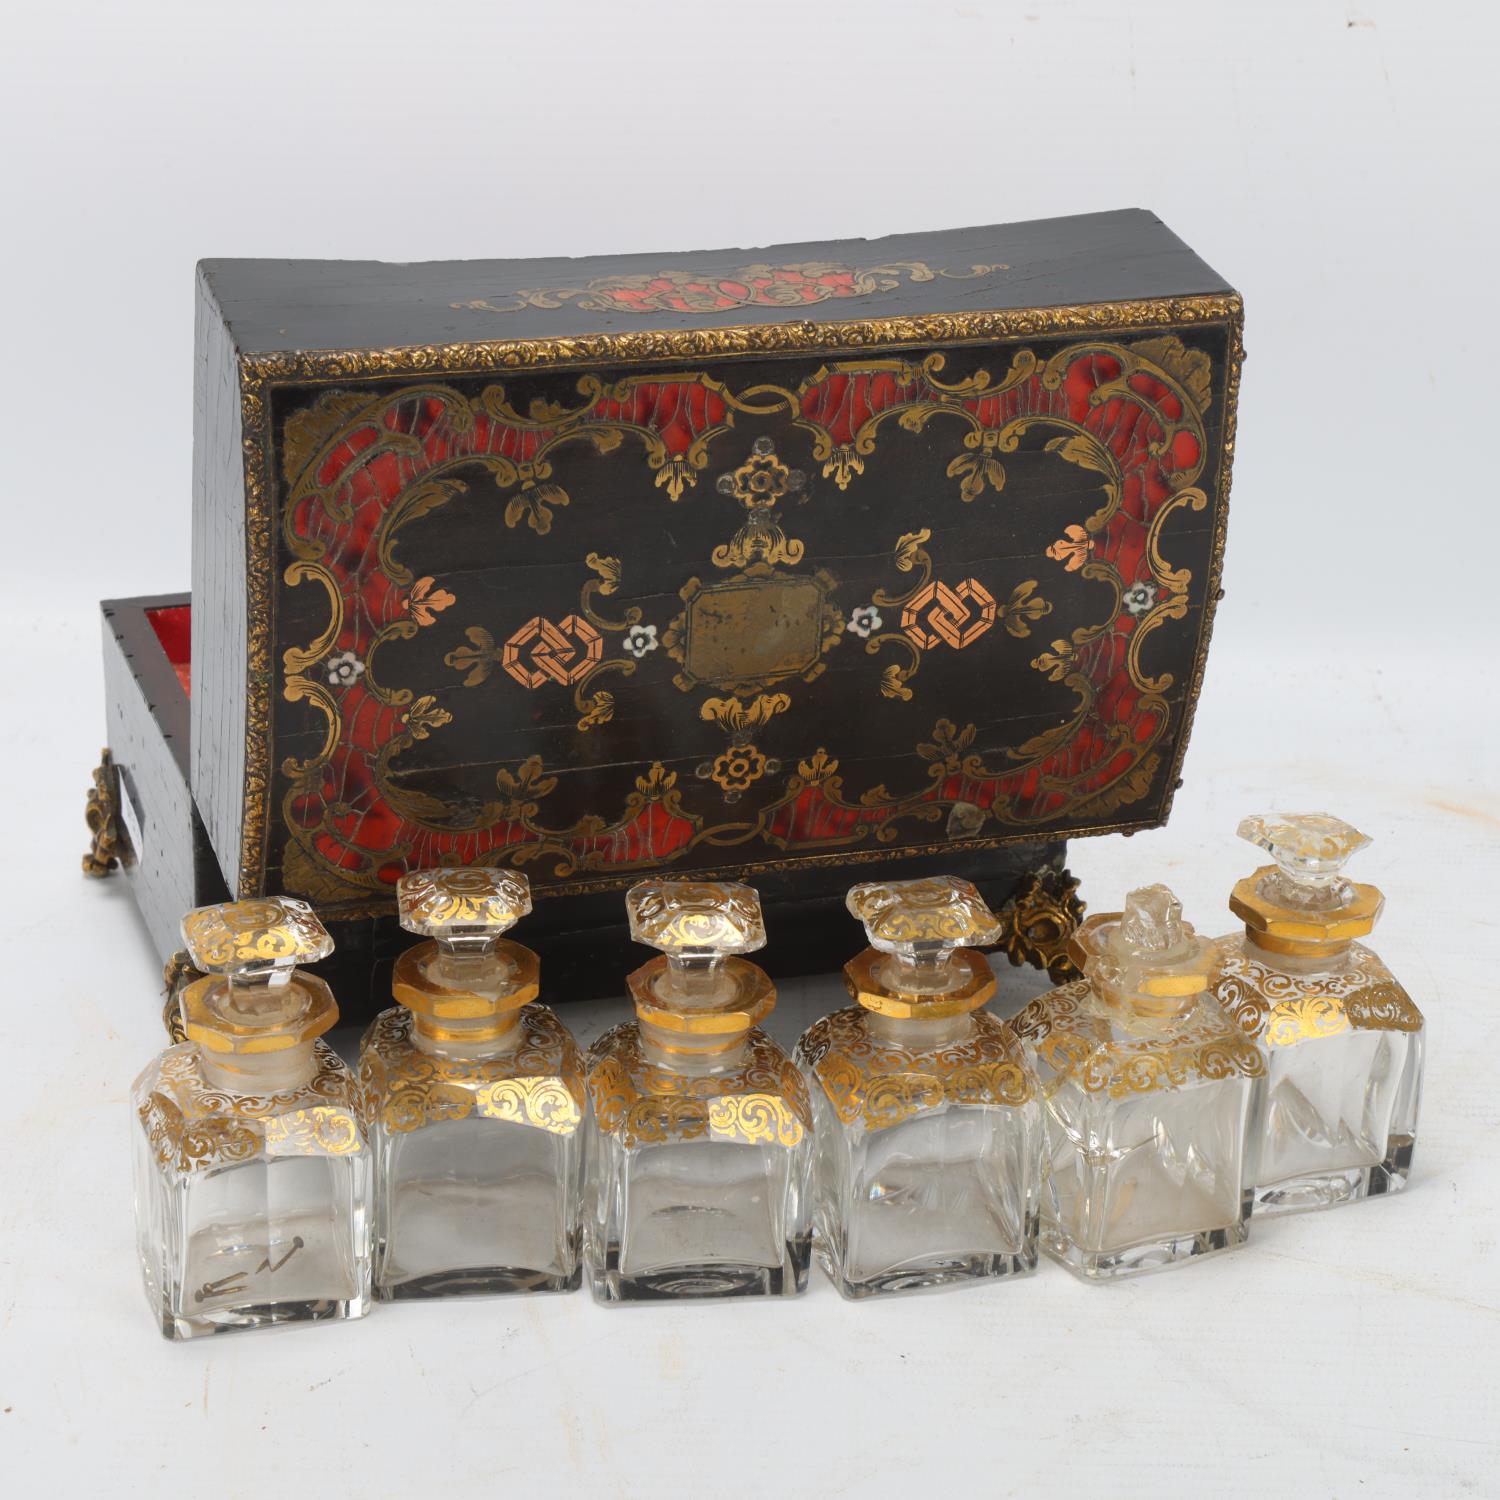 A French 19th century tortoiseshell and brass marquetry inlaid perfume bottle cabinet, containing - Image 3 of 3